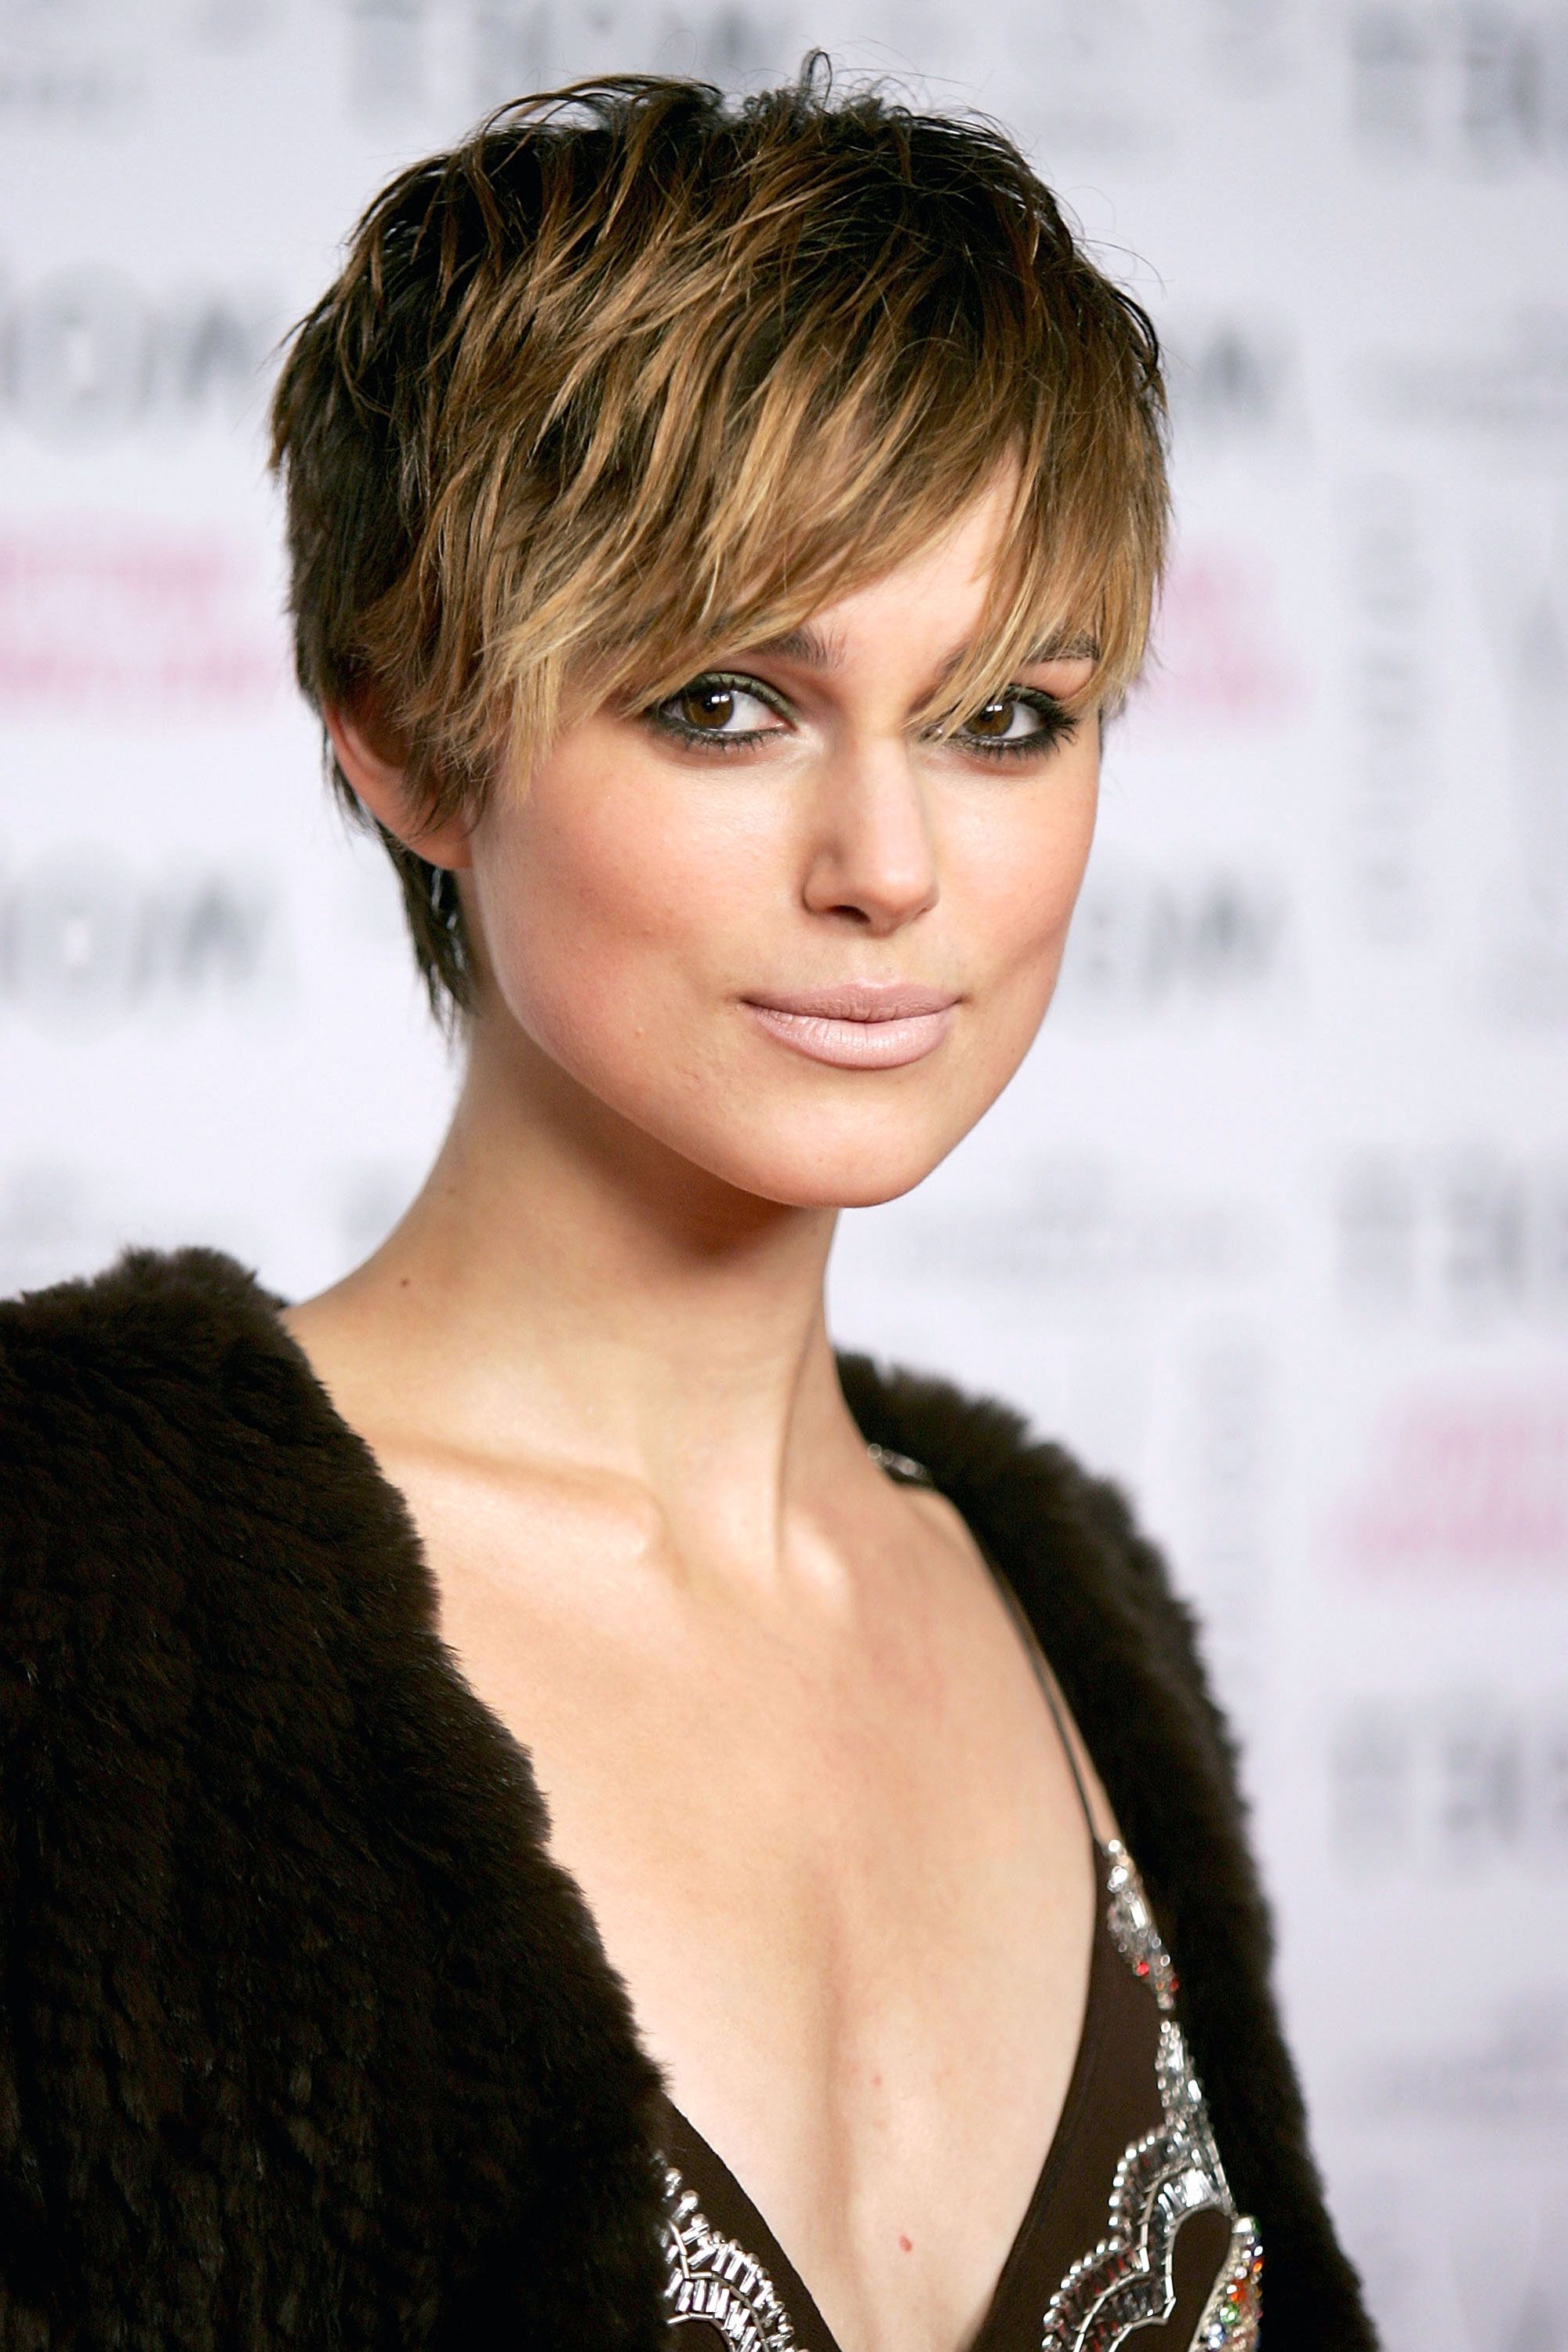 50+ Pixie Cuts We Love For 2018 – Short Pixie Hairstyles From With Regard To Layered Pixie Hairstyles With An Edgy Fringe (Gallery 11 of 20)